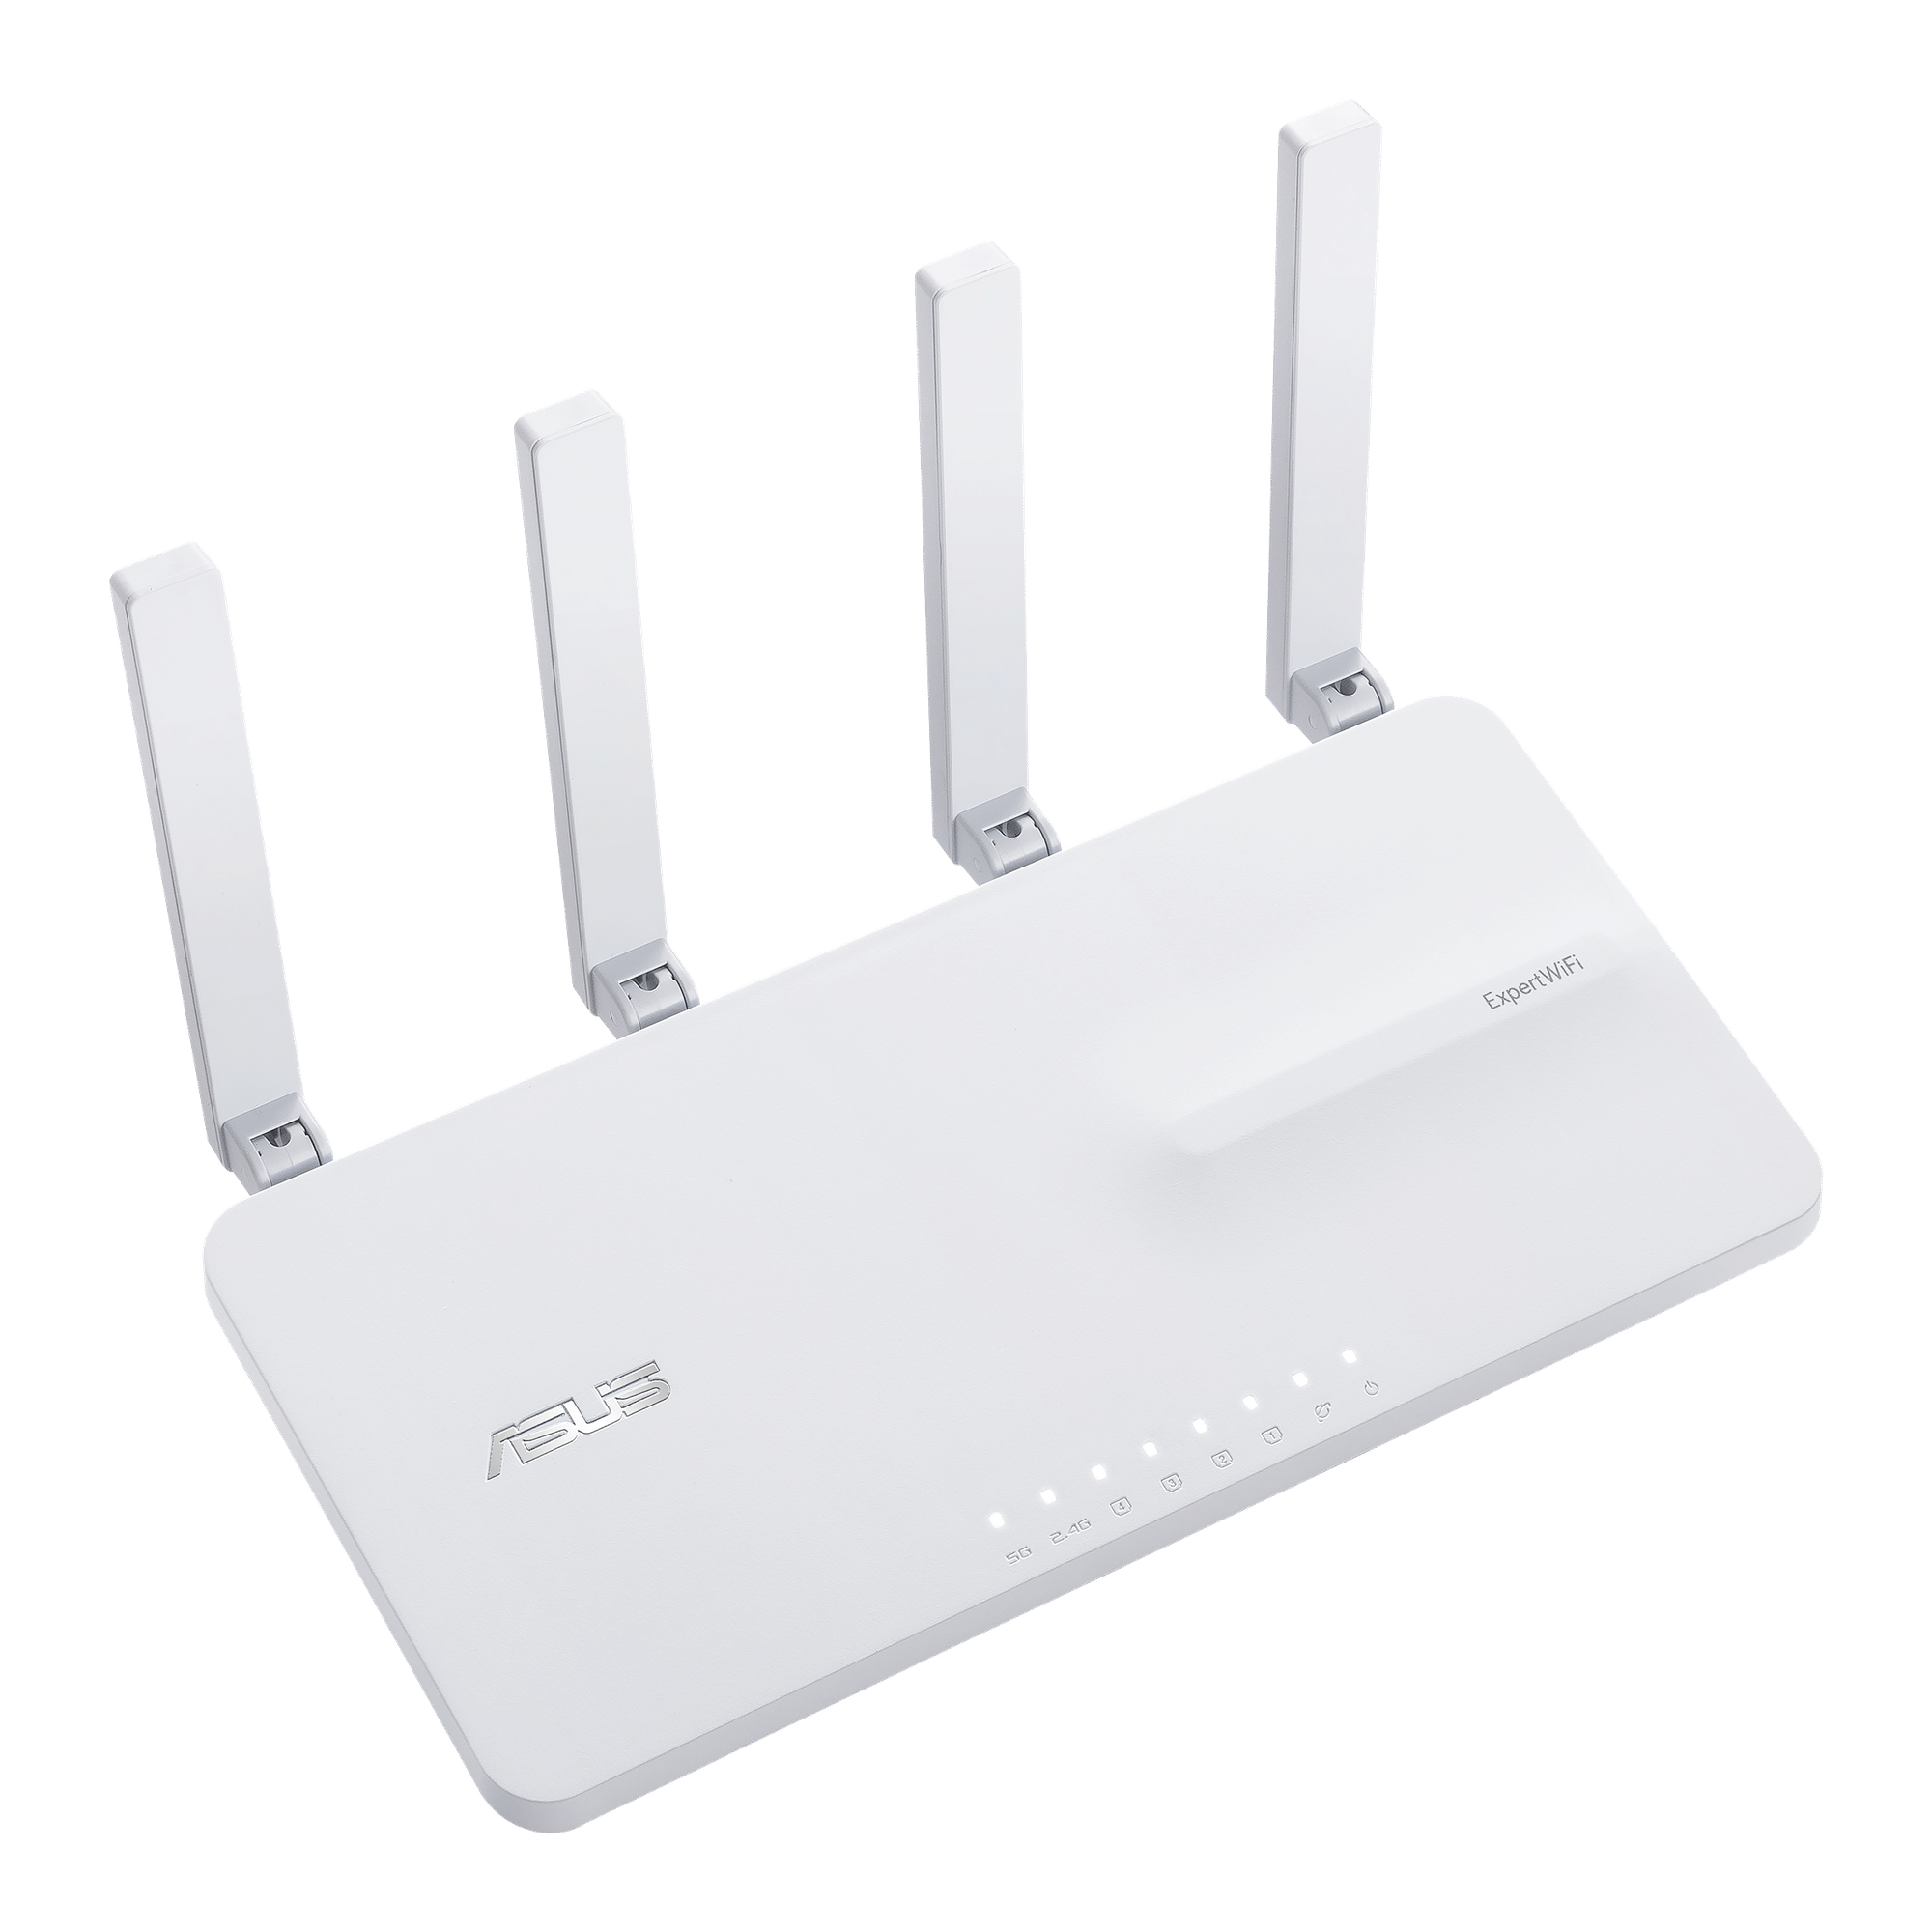 WLAN ExpertWiFi AX3000 EBR63 ASUS ROUTER